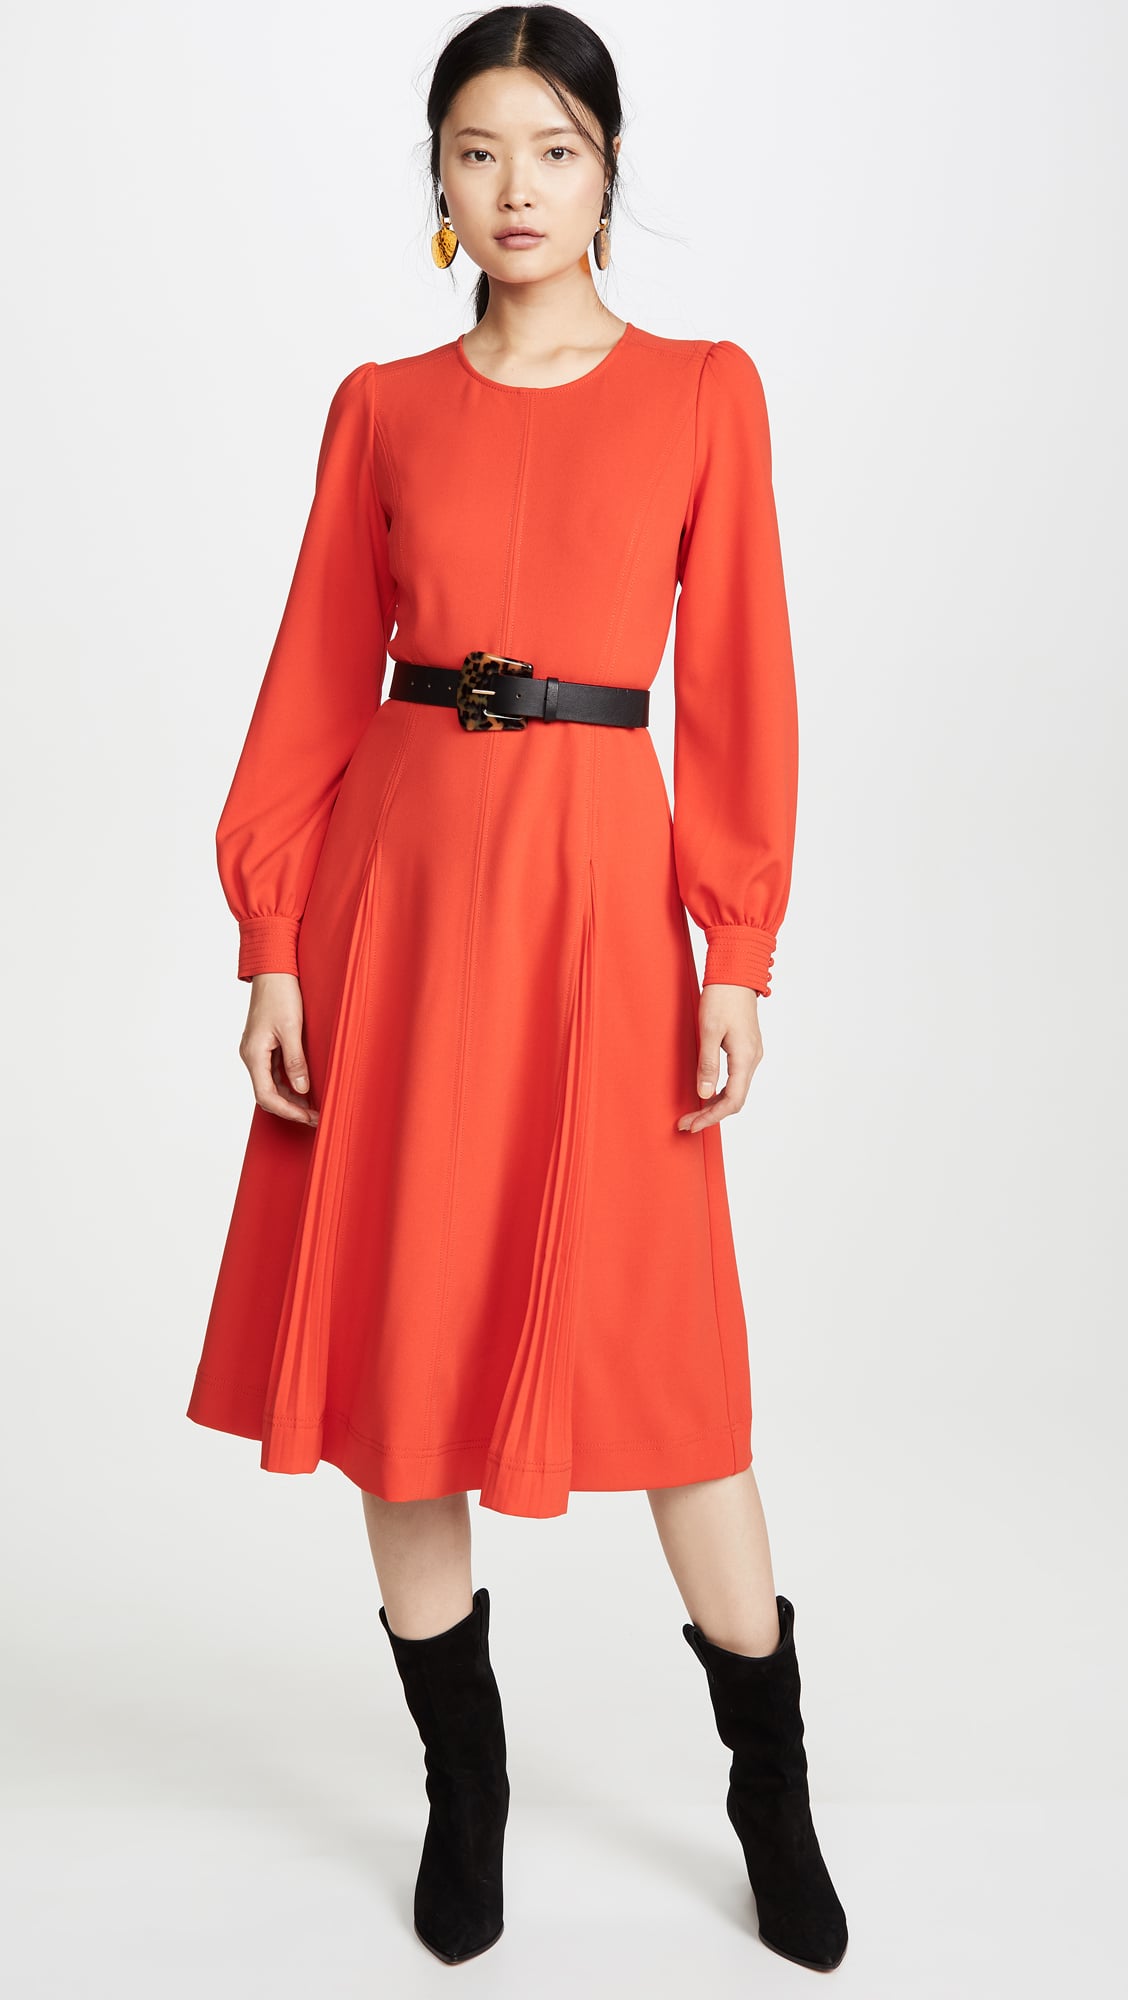 Tory Burch Knit Crepe Dress | Starting at Just $20, These 40+ Workwear  Pieces Are Easy to Take From the Desk to Date Night | POPSUGAR Fashion  Photo 46